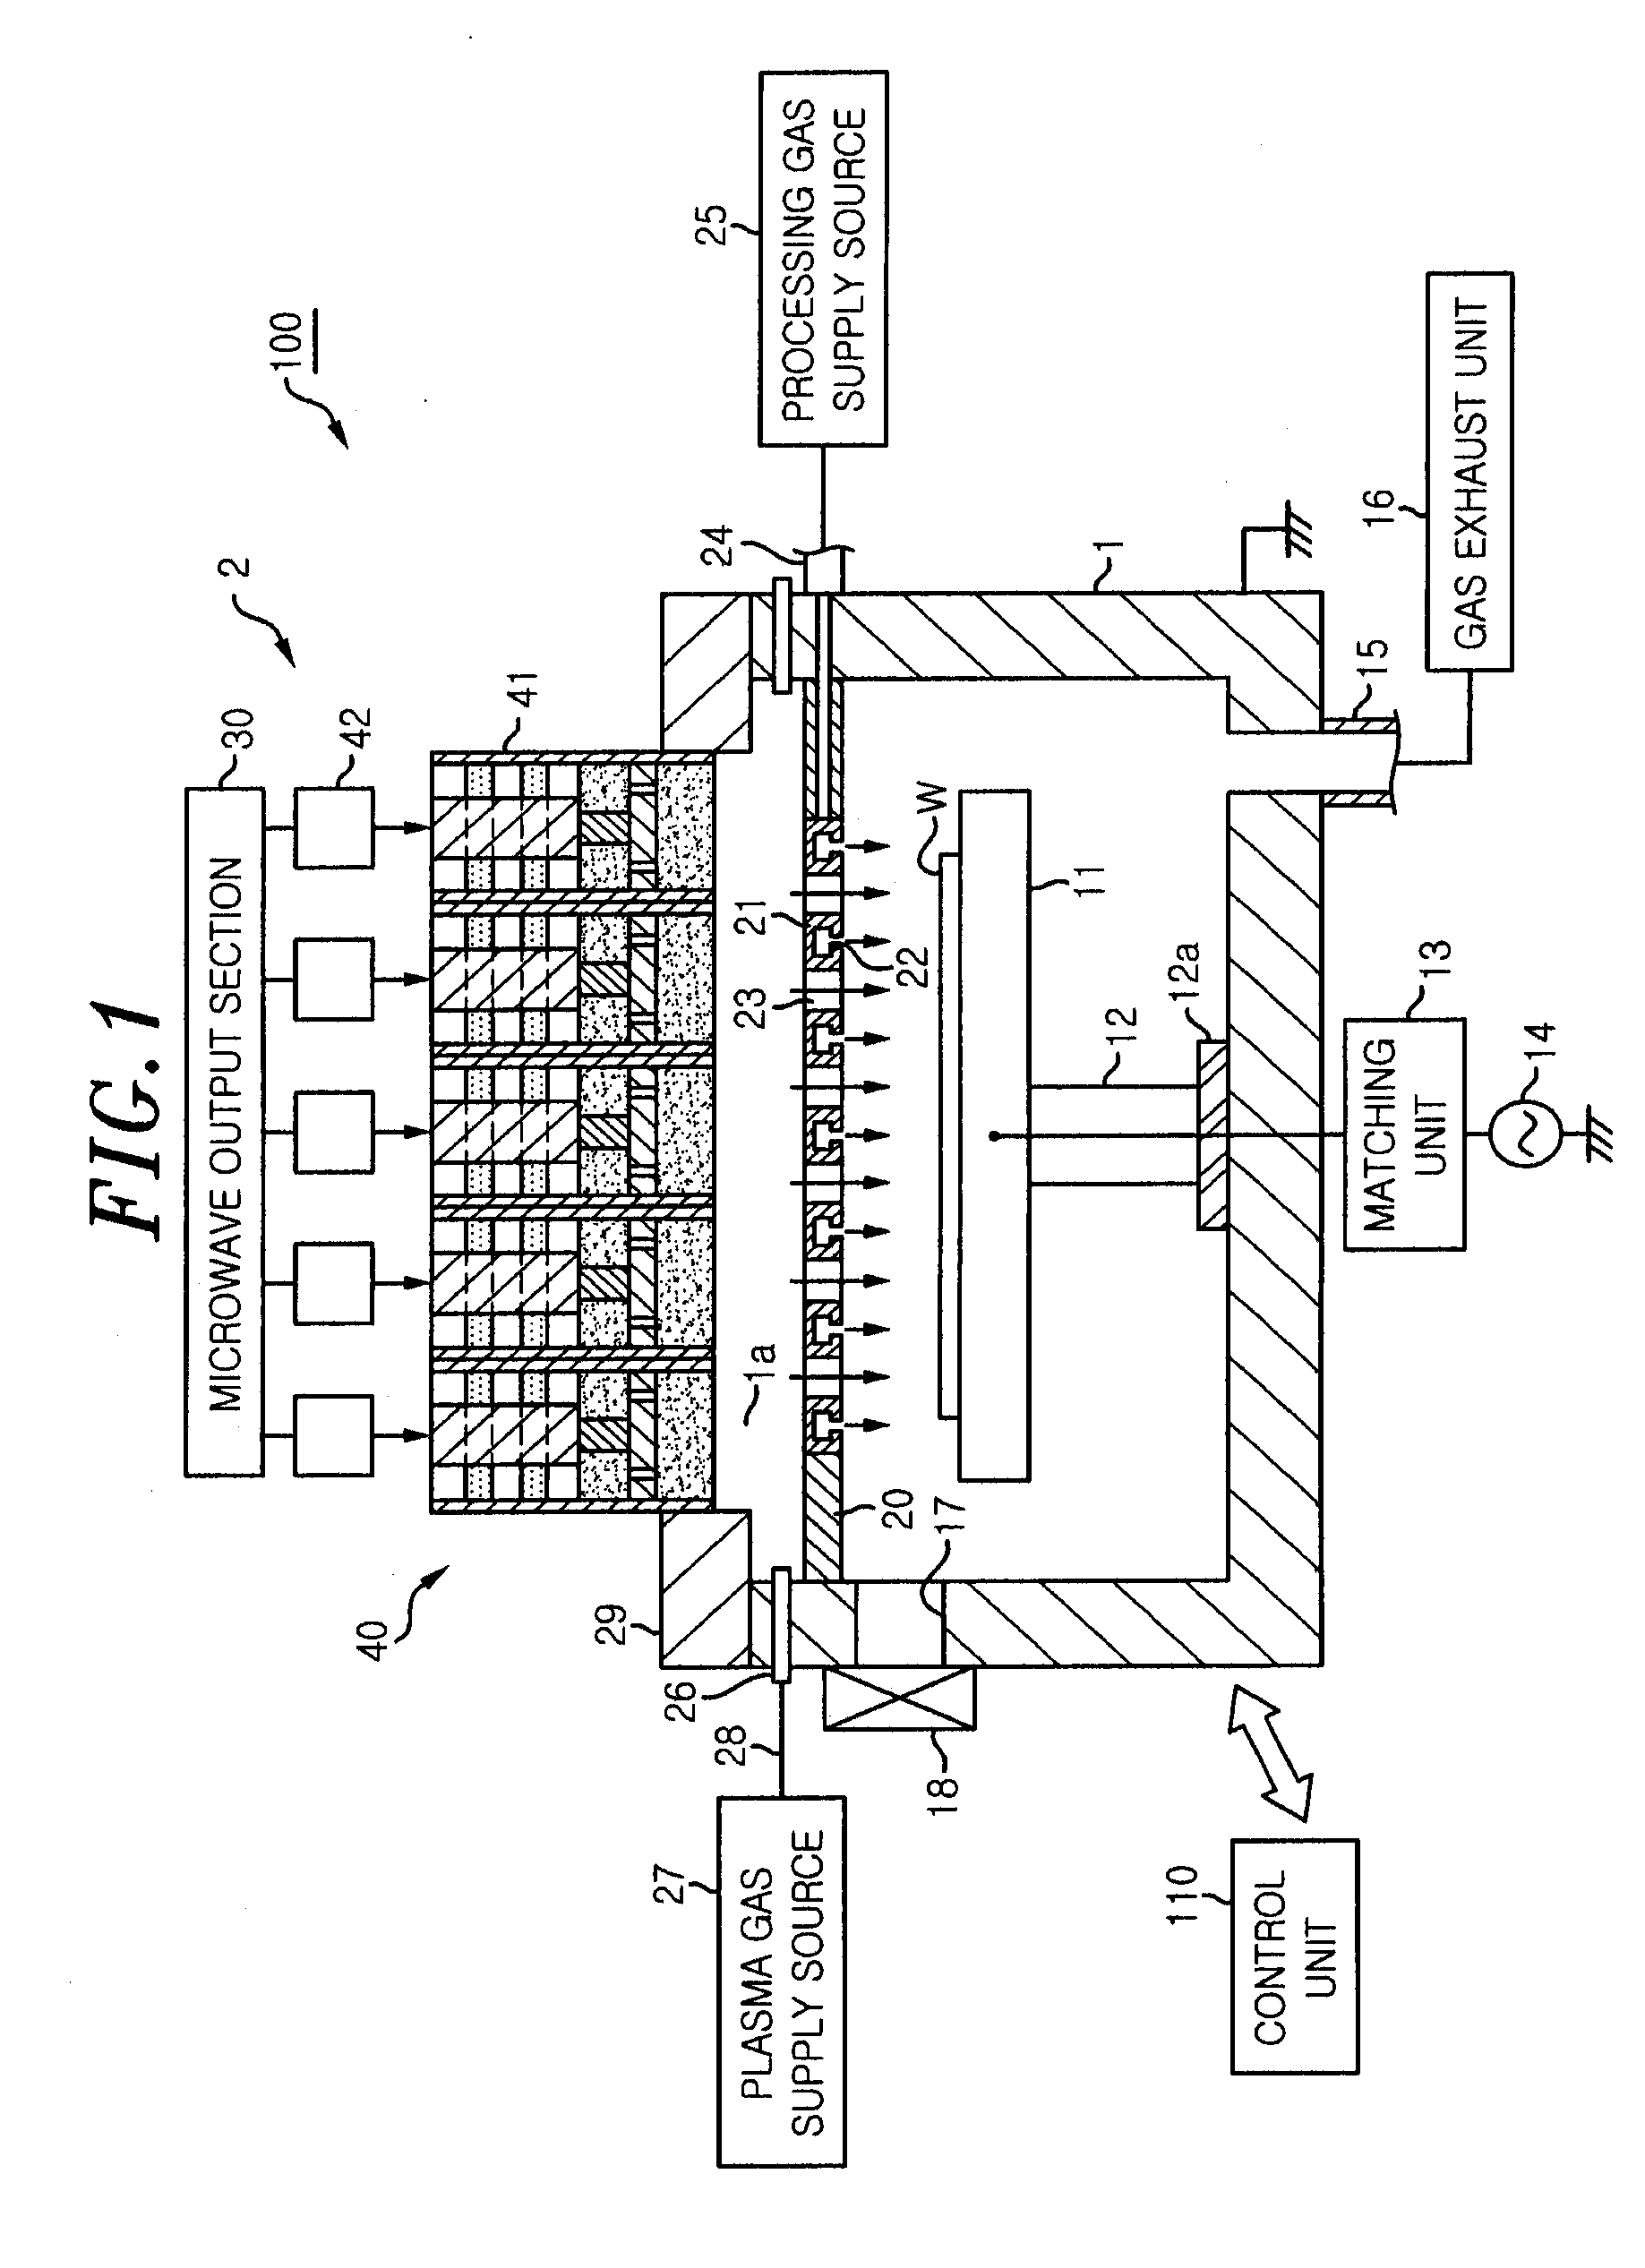 Electromagnetic-radiation power-supply mechanism and microwave introduction mechanism